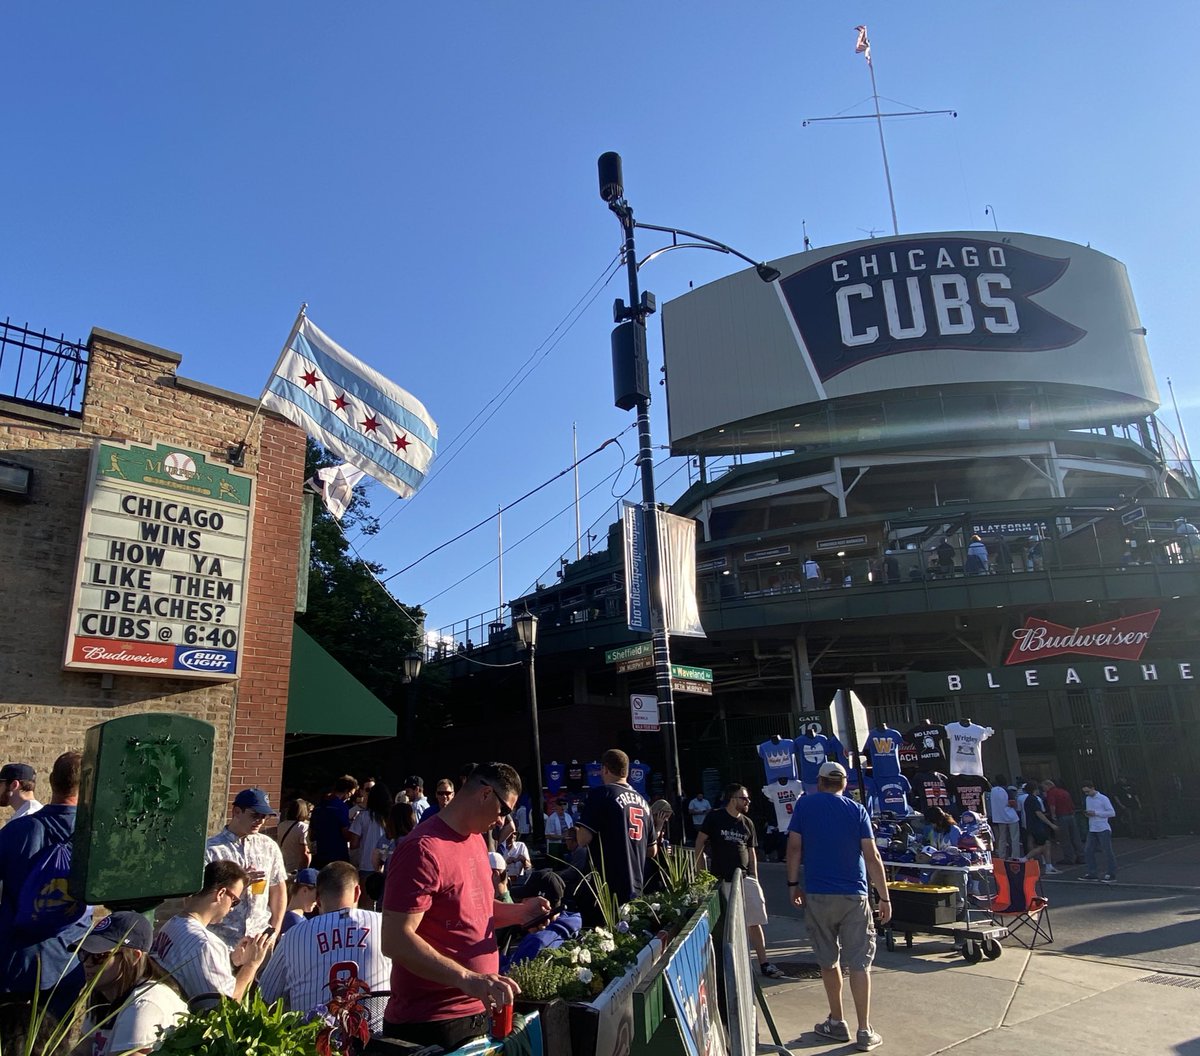 We like them. We like them a lot. Things are about to get juicy tonight @ Wrigley - Let’s go @cubs 

#chicagocubs #chicagocubsbaseball #chicagocubsfan #chicagocubs🐻 #gocubsgo #gocubsgo⚾️🐻💙❤️ #cubsofinstagram #cubswin #wrigley #wrigleyville #wrigleyfield #murphysbleachers